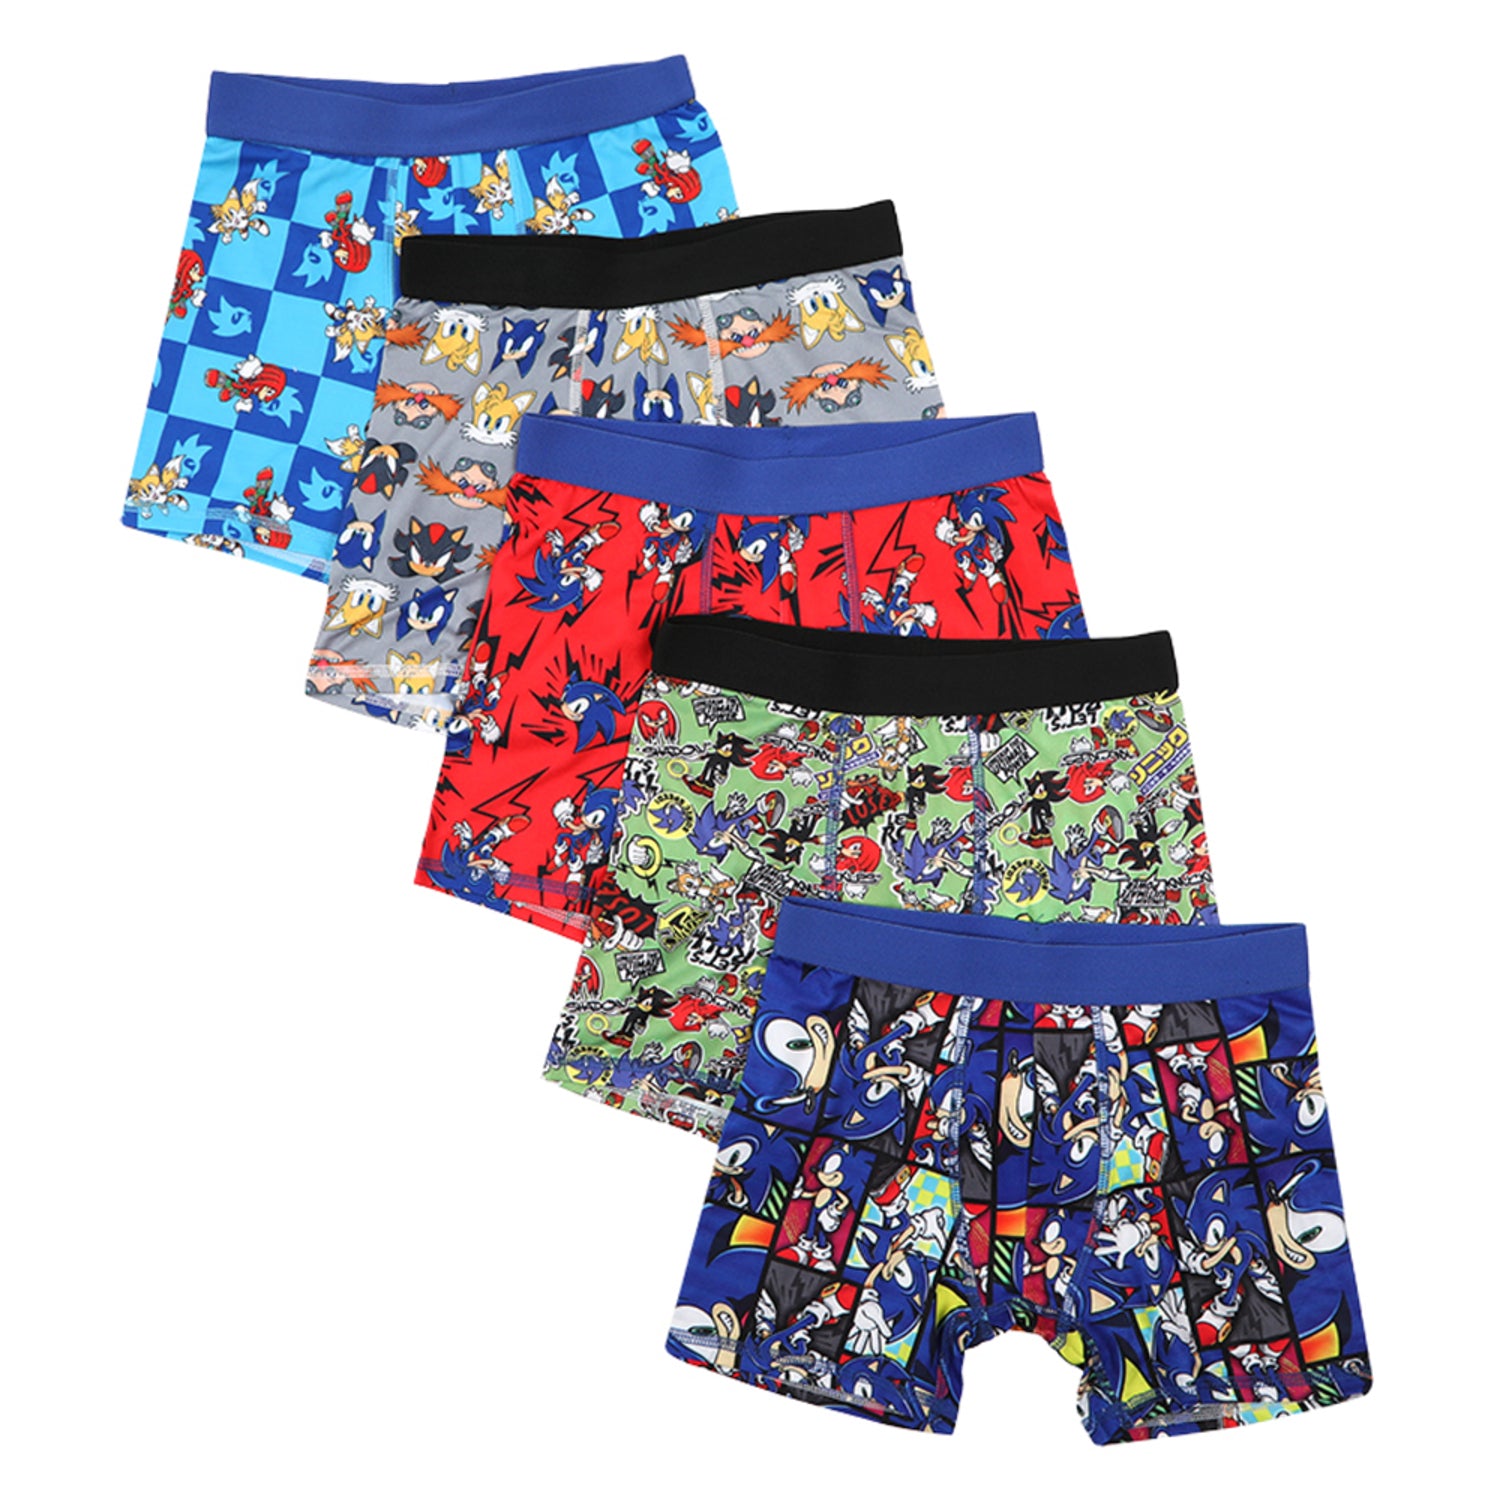 Boys Boxers 5 Pack Trunks Underwear Camo Gaming Design Coloured